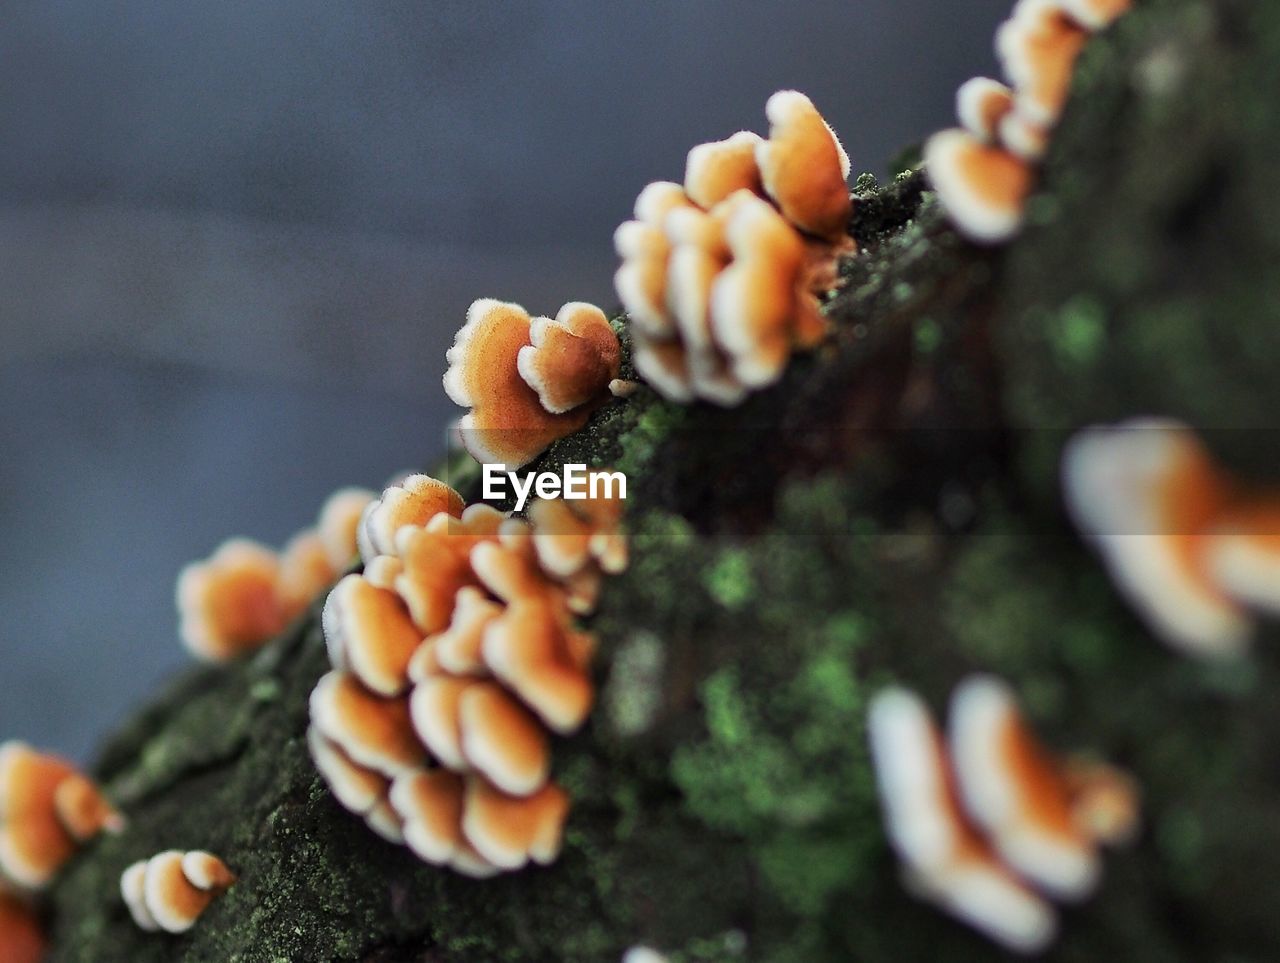 Close-up of fungi on tree trunk